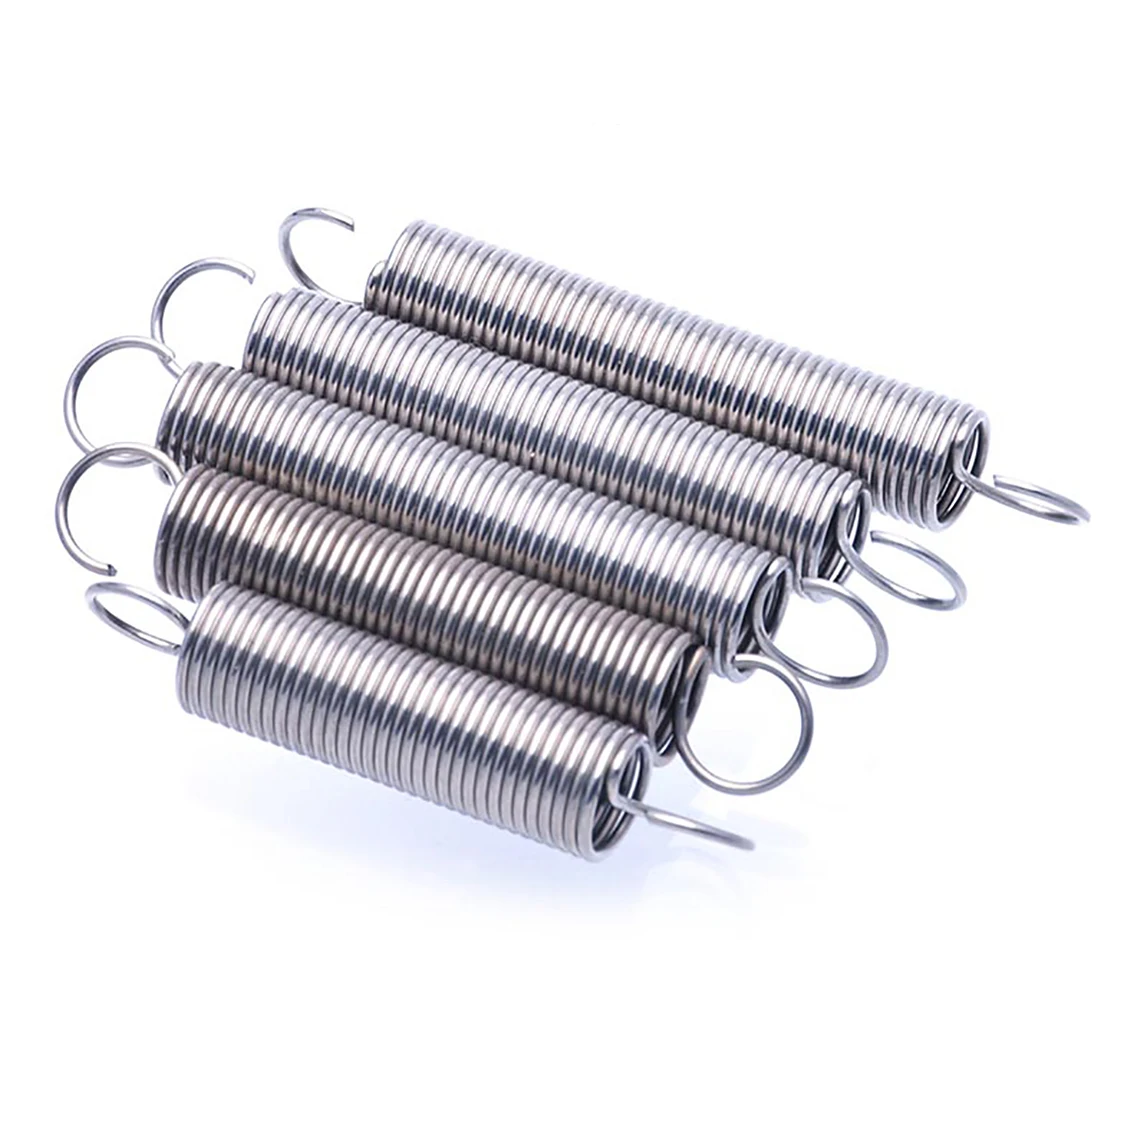 2-6mm 65Mn Steel Extension Extending Springs Double Loop 300mm 1pcs Wire Dia 